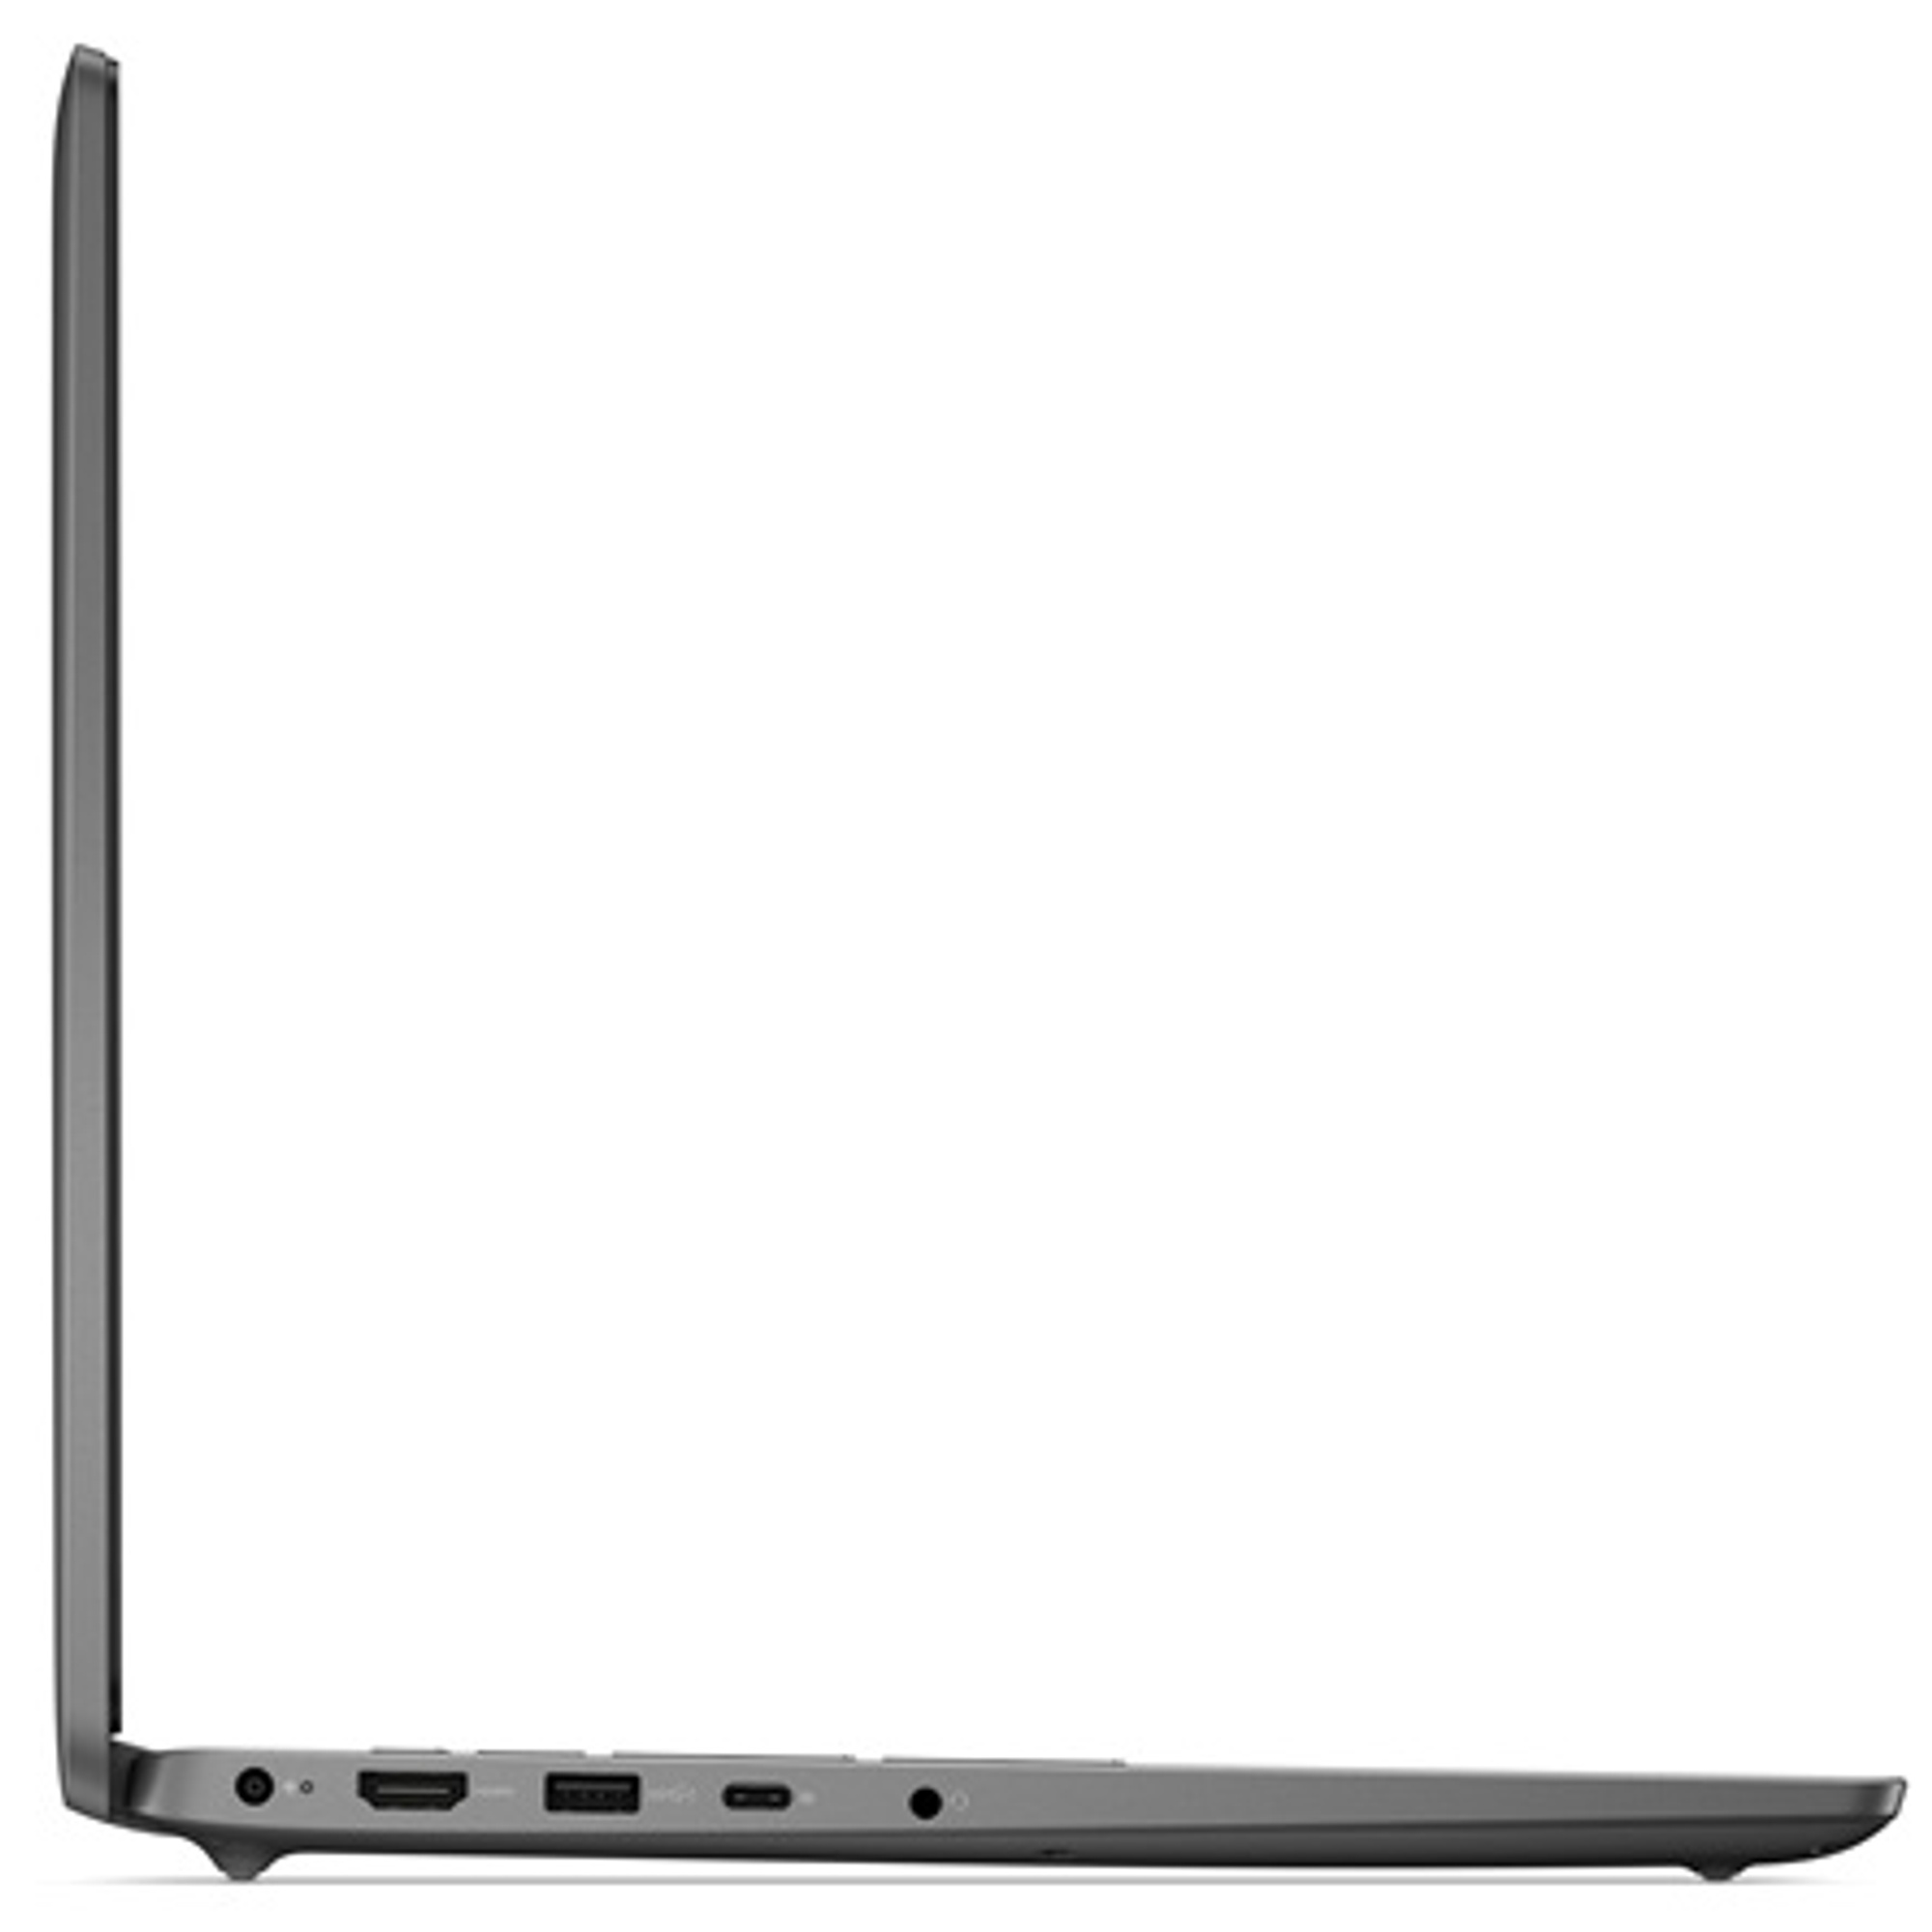 DELL L3540-17 Laptop / Notebook 3